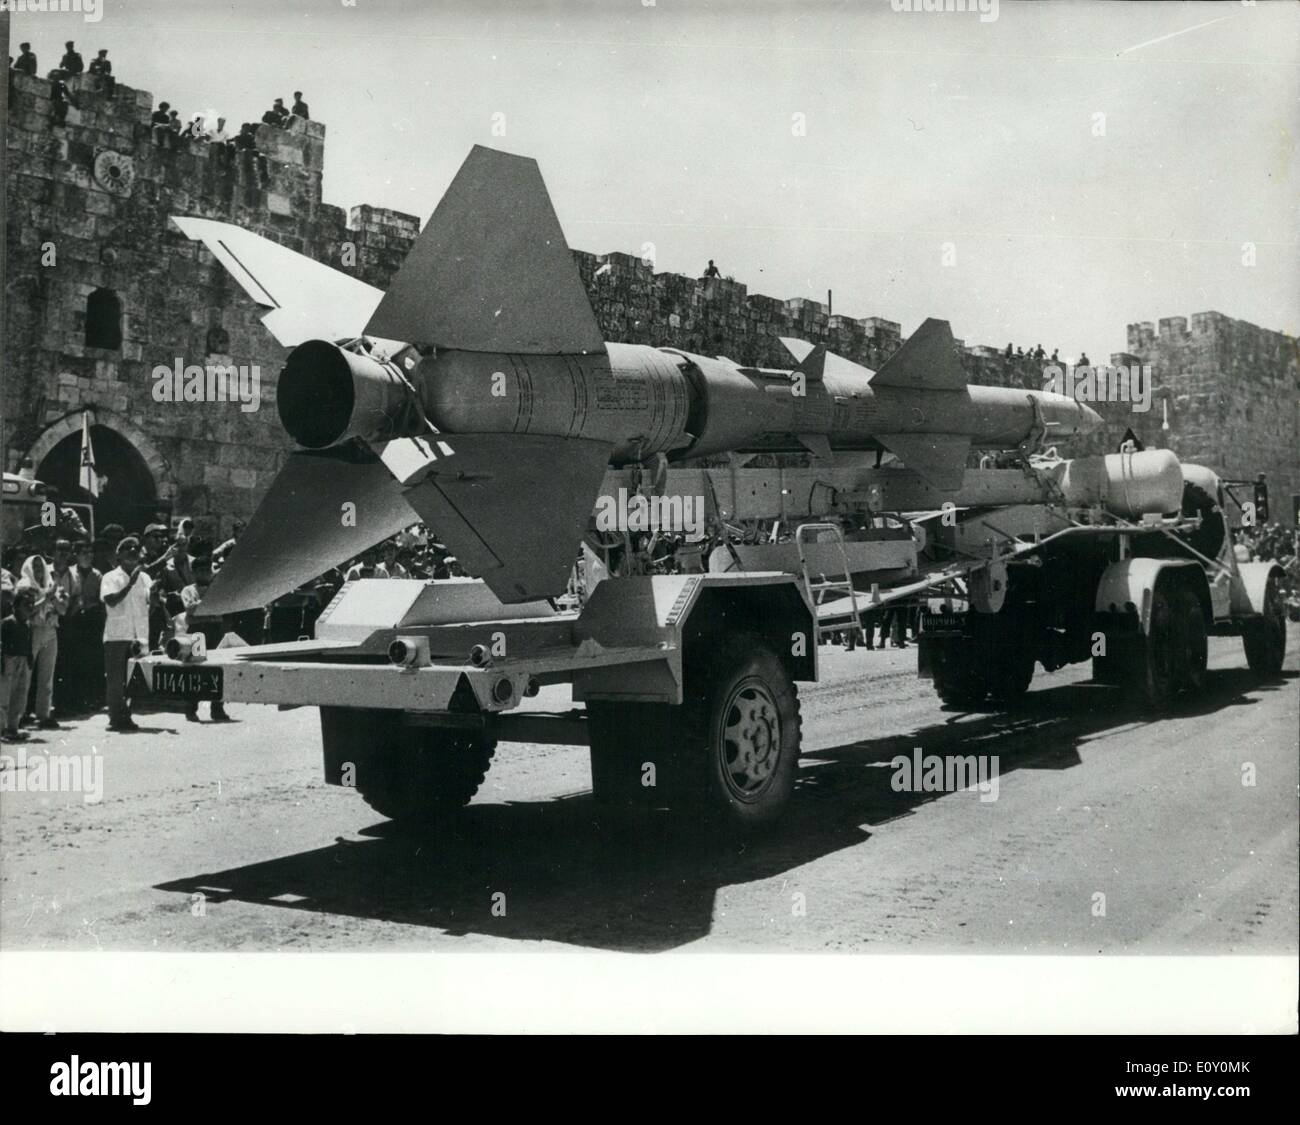 May 05, 1968 - Israel celebrates 20th anniversary of its independence with a military parade: Israel celebrated its 20 years of Stock Photo